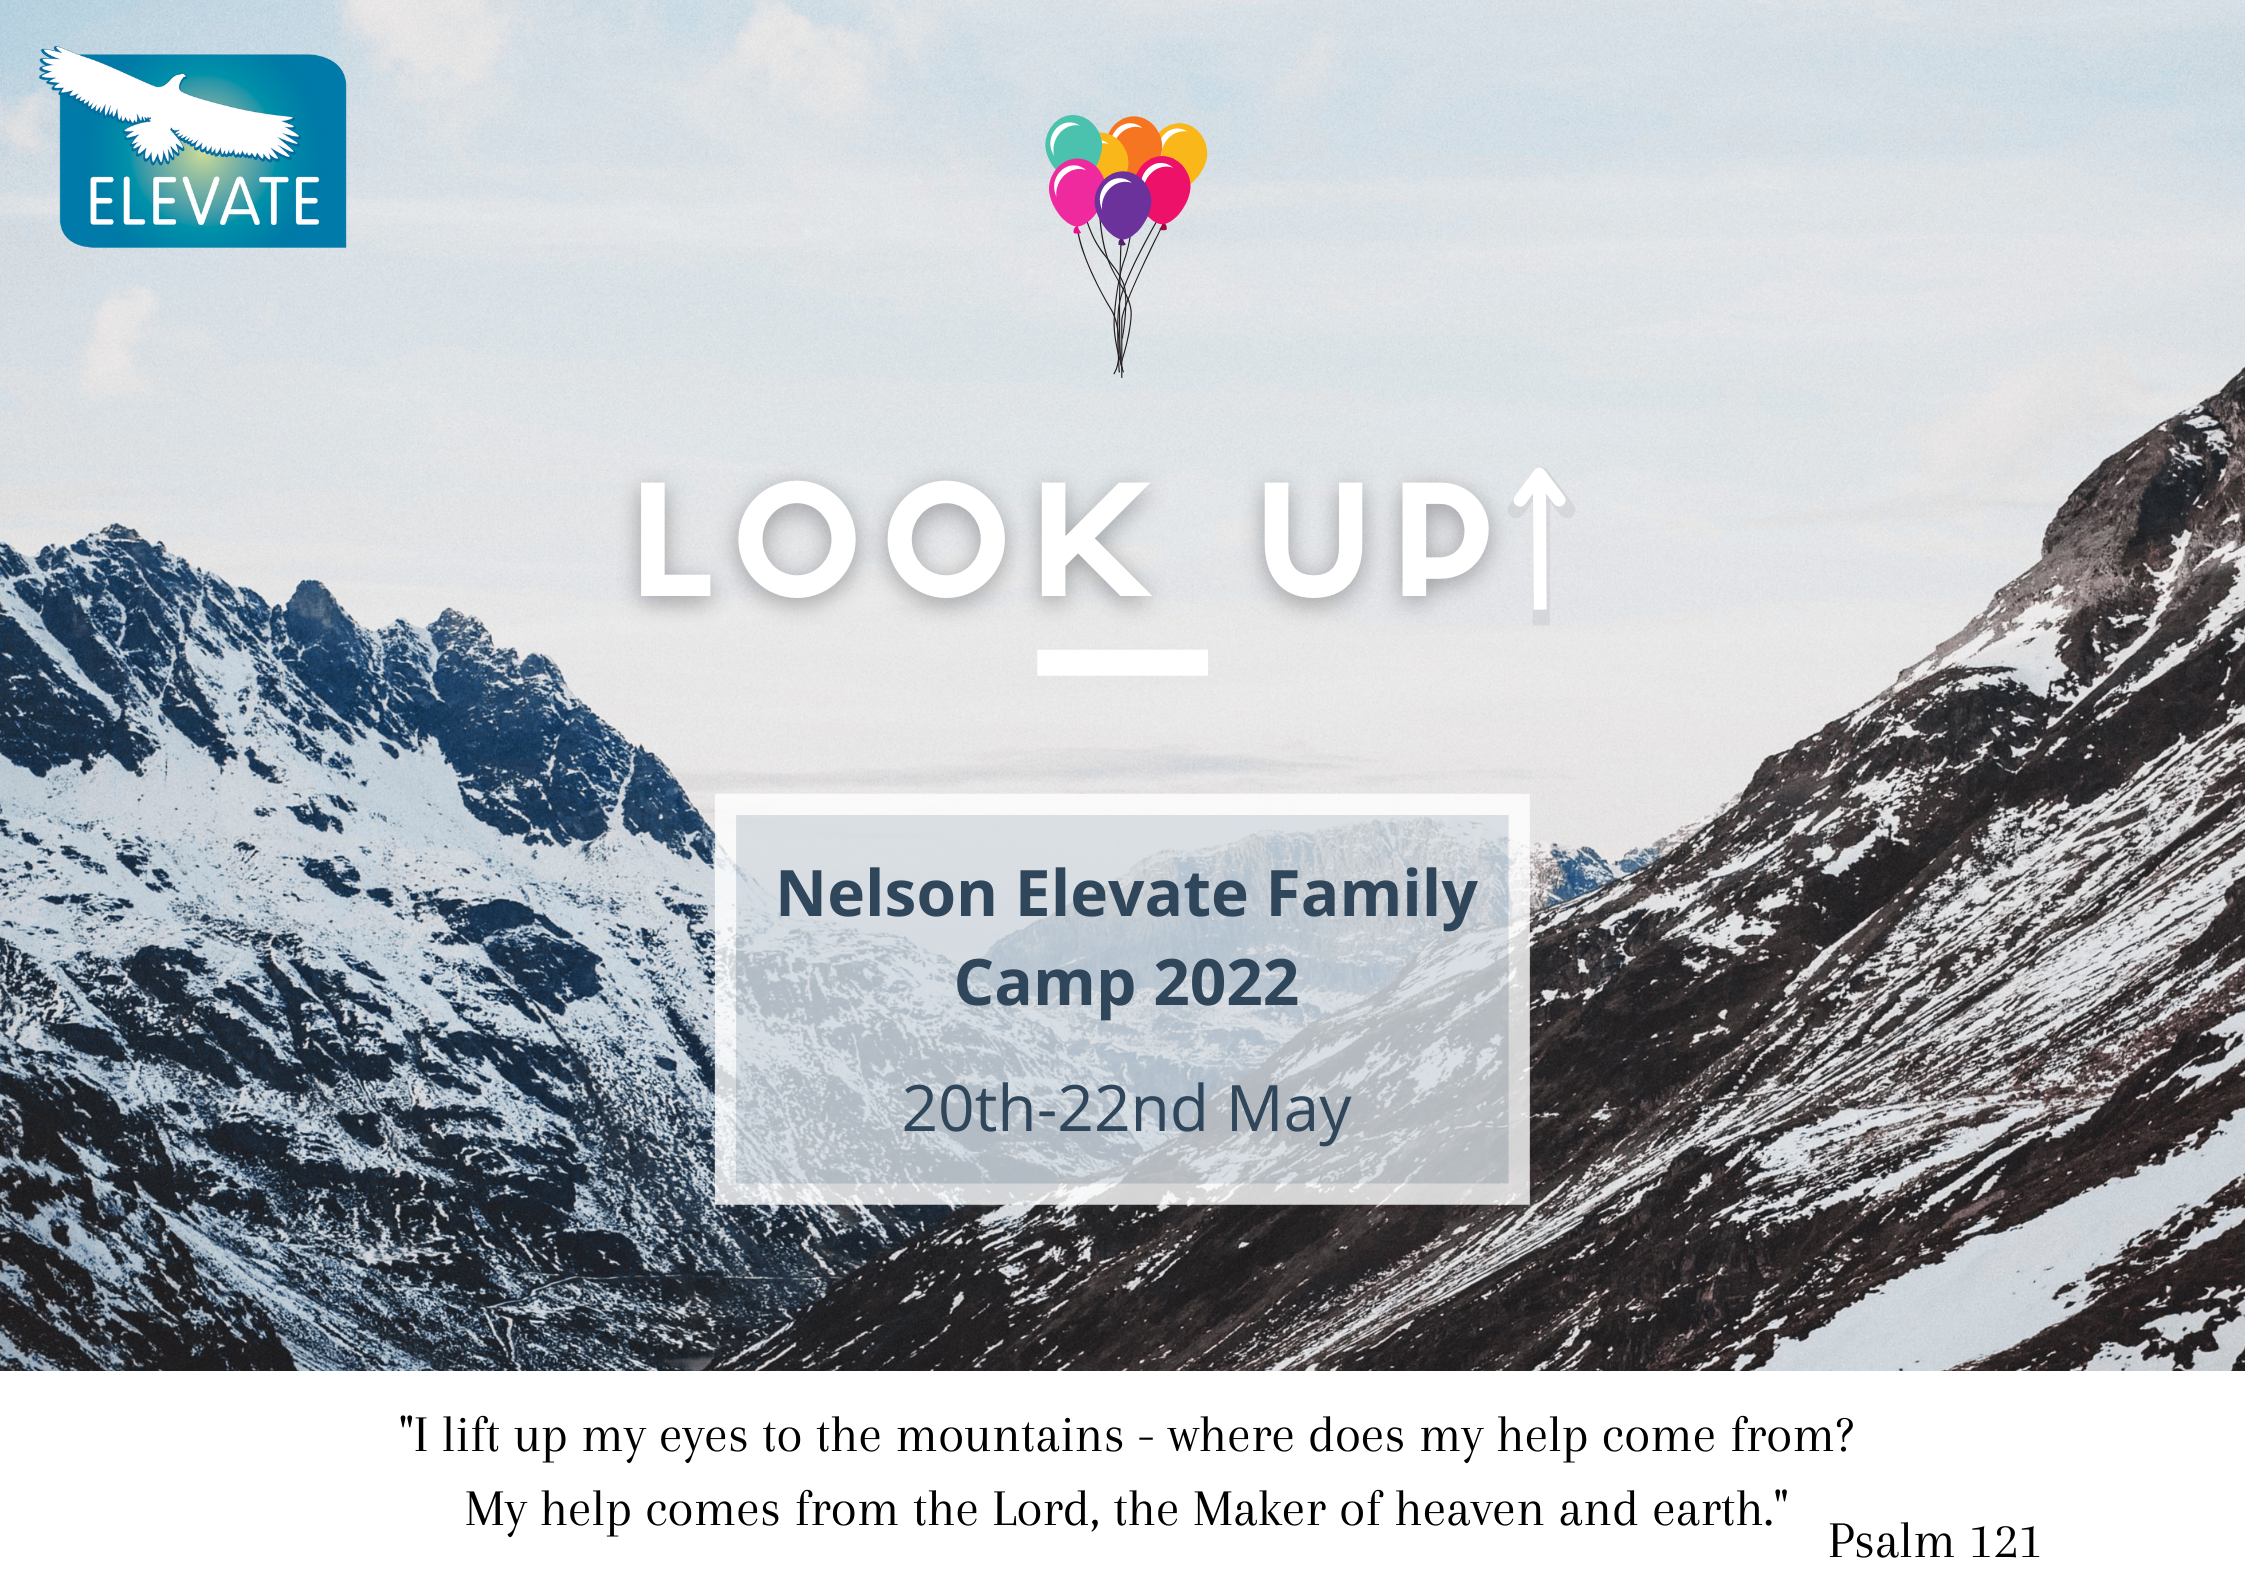 Snow caped mountains with an image of a group of colourful ballons floating in the air. The camp's theme, 'Look Up!' is written in front along with the Nelson camp dates: 20th-22nd May 2022. The verse Psalm 121:1 is written at the bottom.